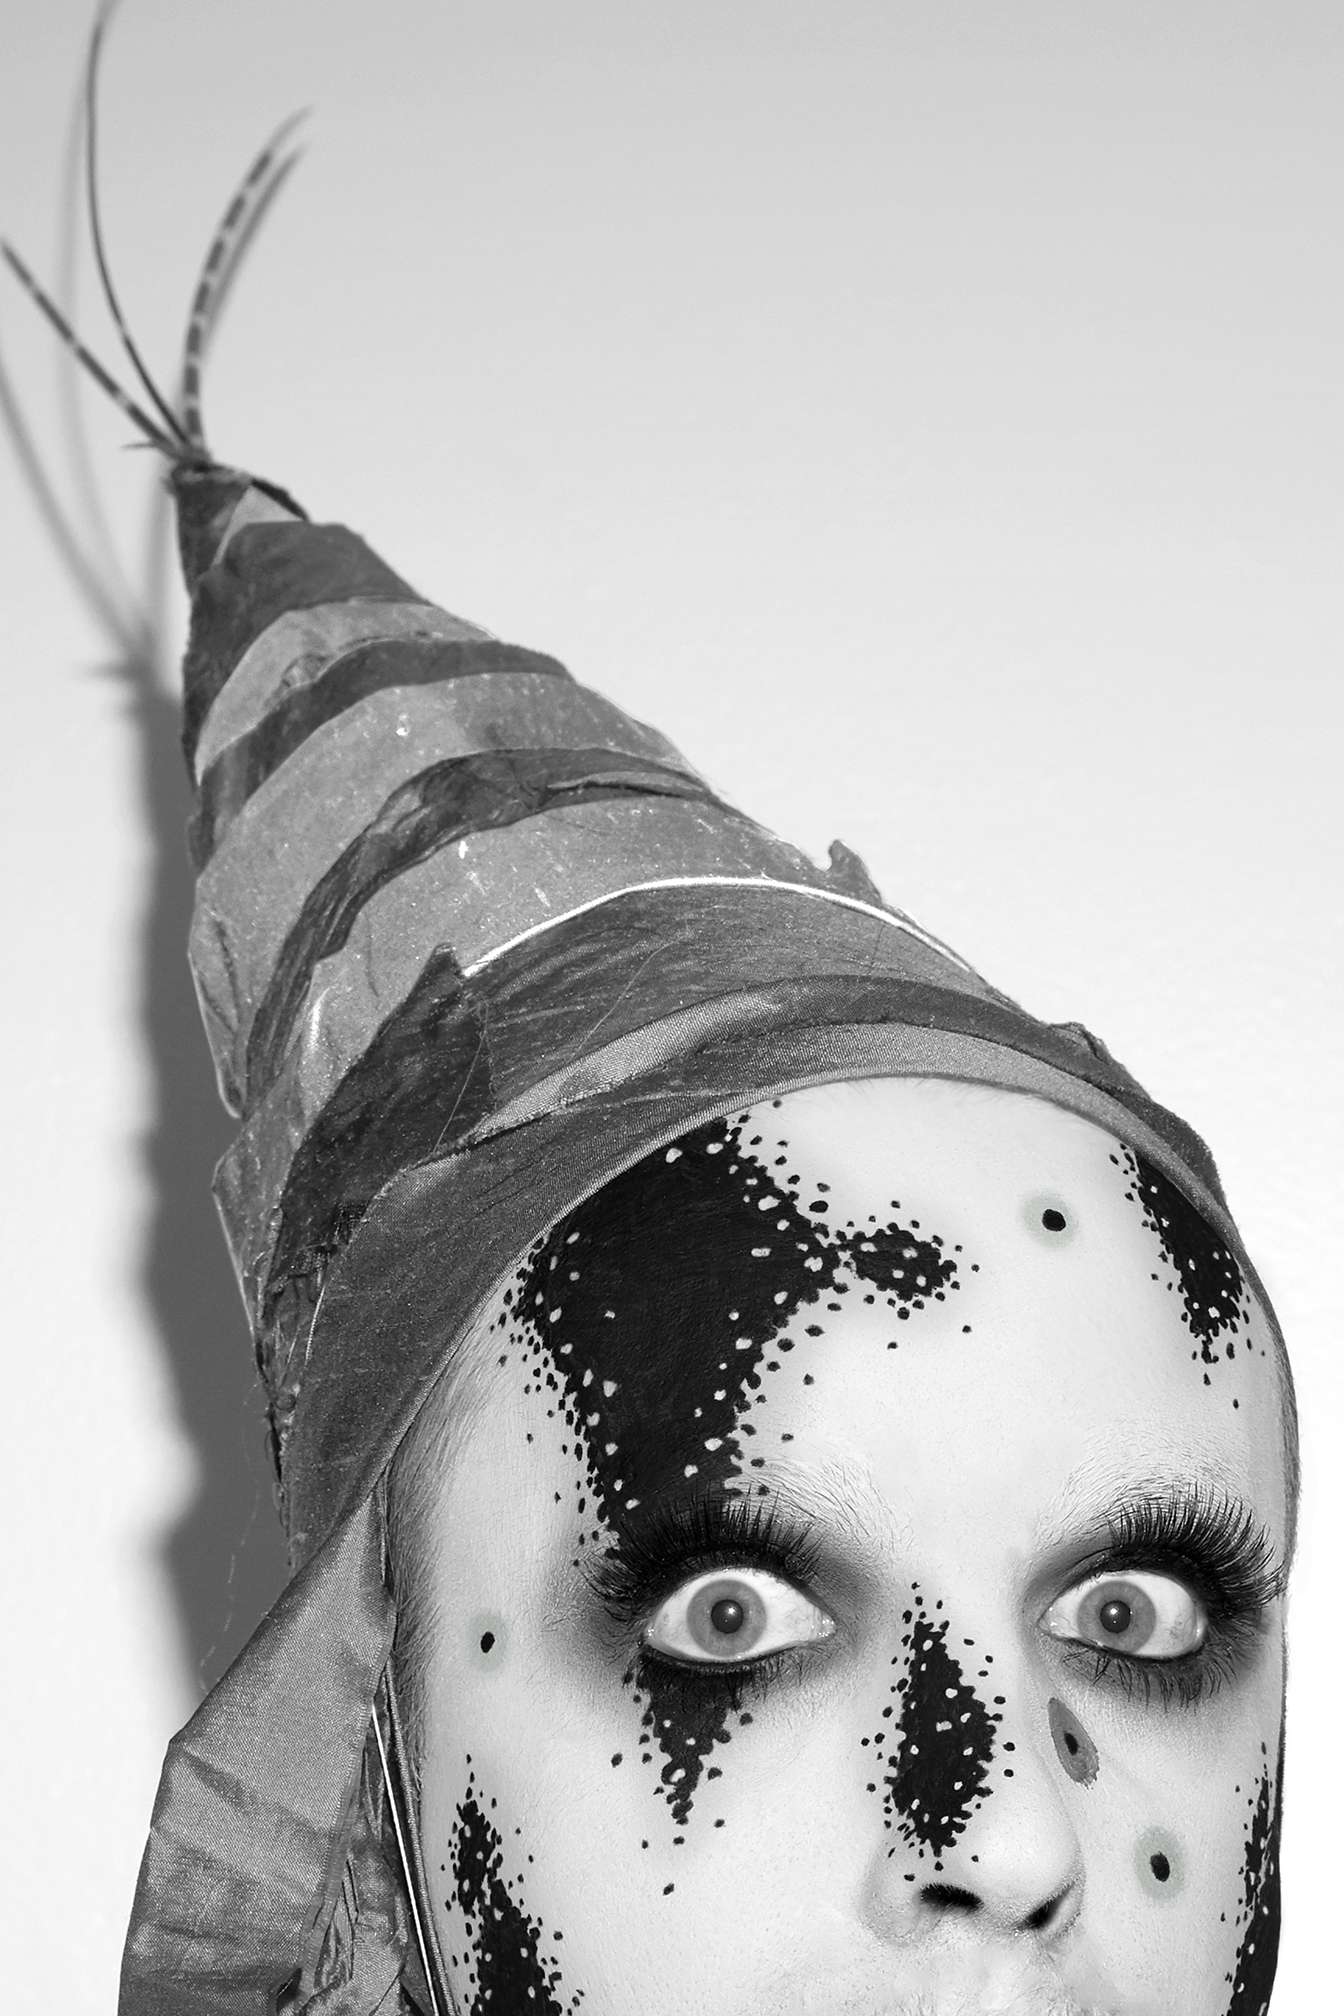 Detail of Jesse with graphic black and white facepaint on and a fabric cone on his head against a white background